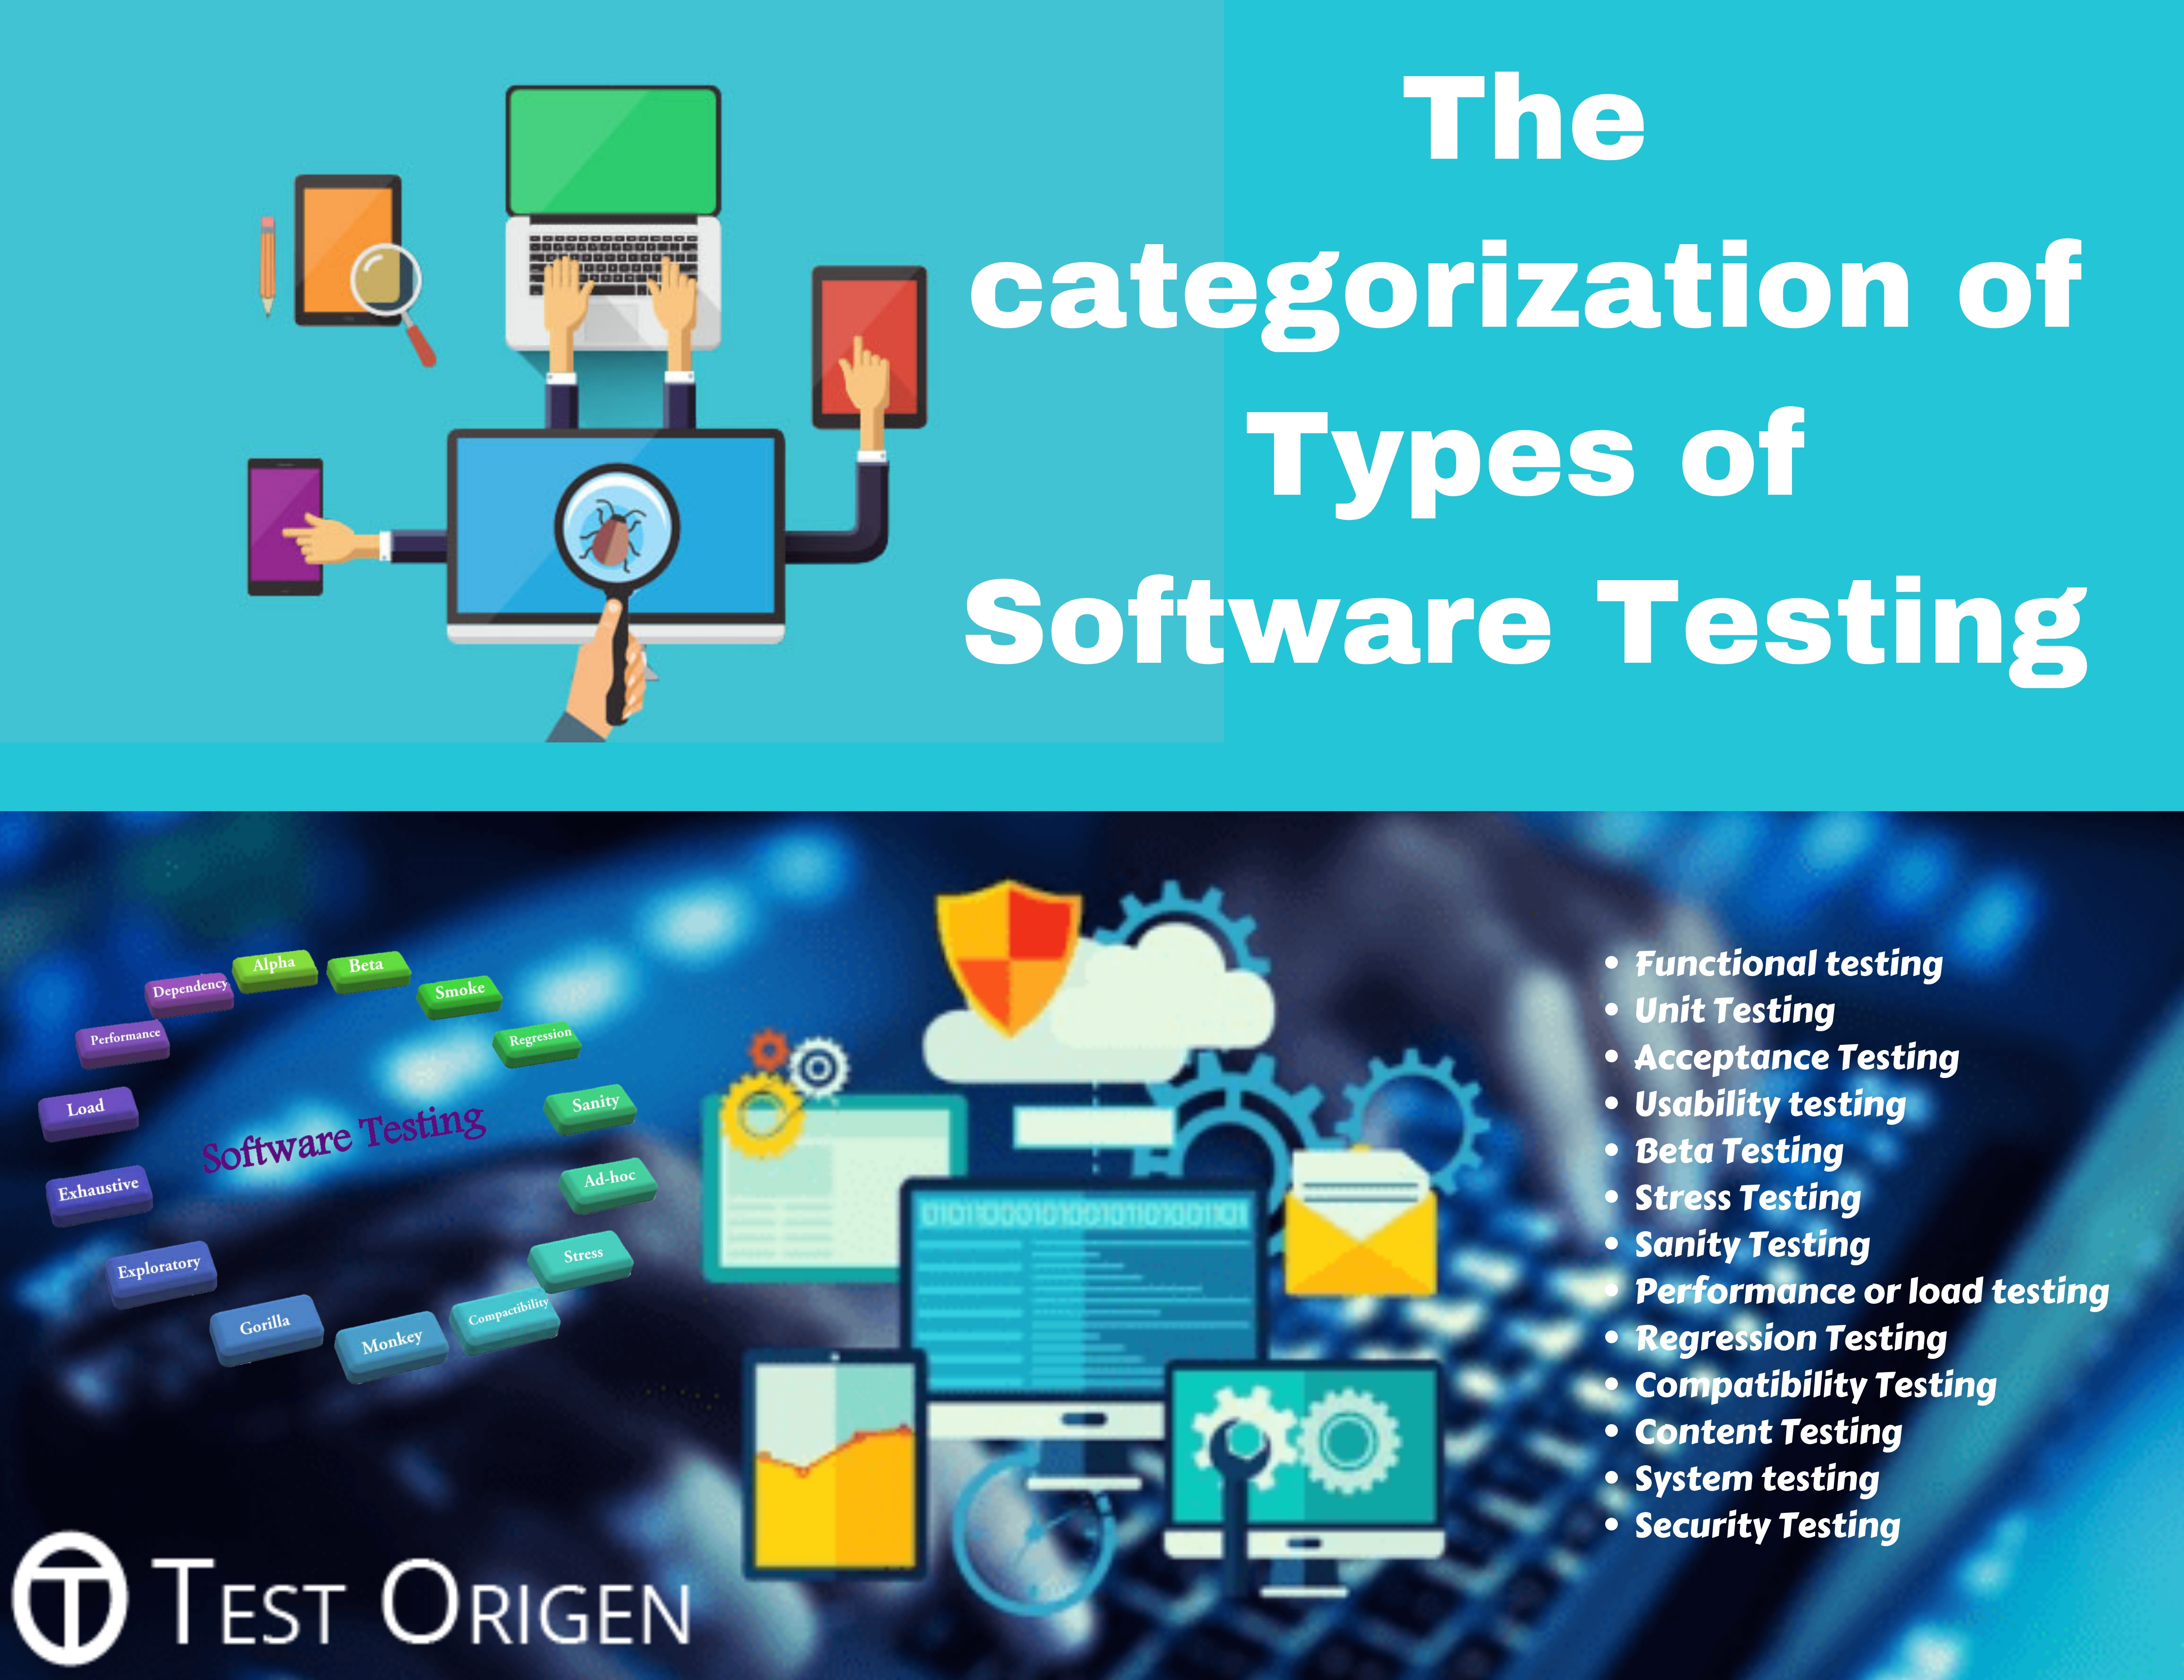 The categorization of Types of Software Testing